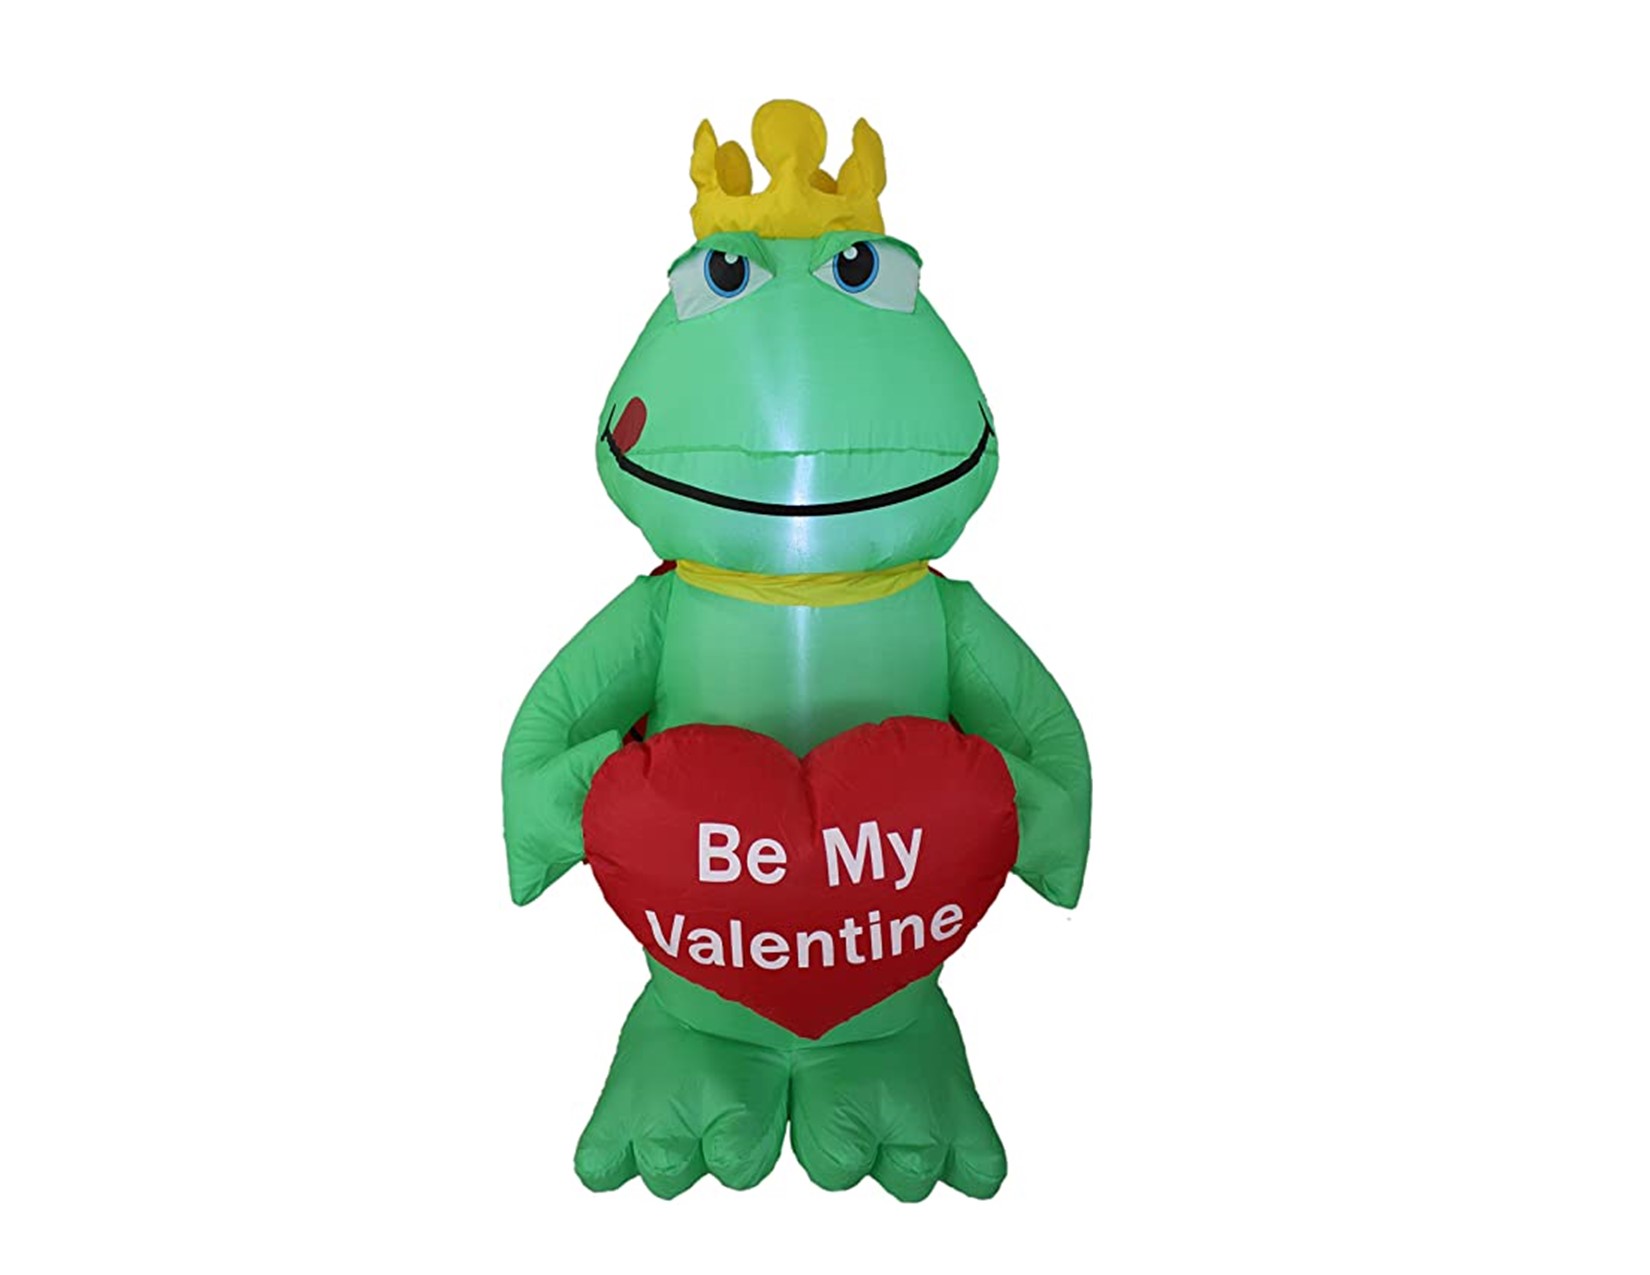 green inflatable frog with gold crown and holding a red heart that says "Be My Valentine"